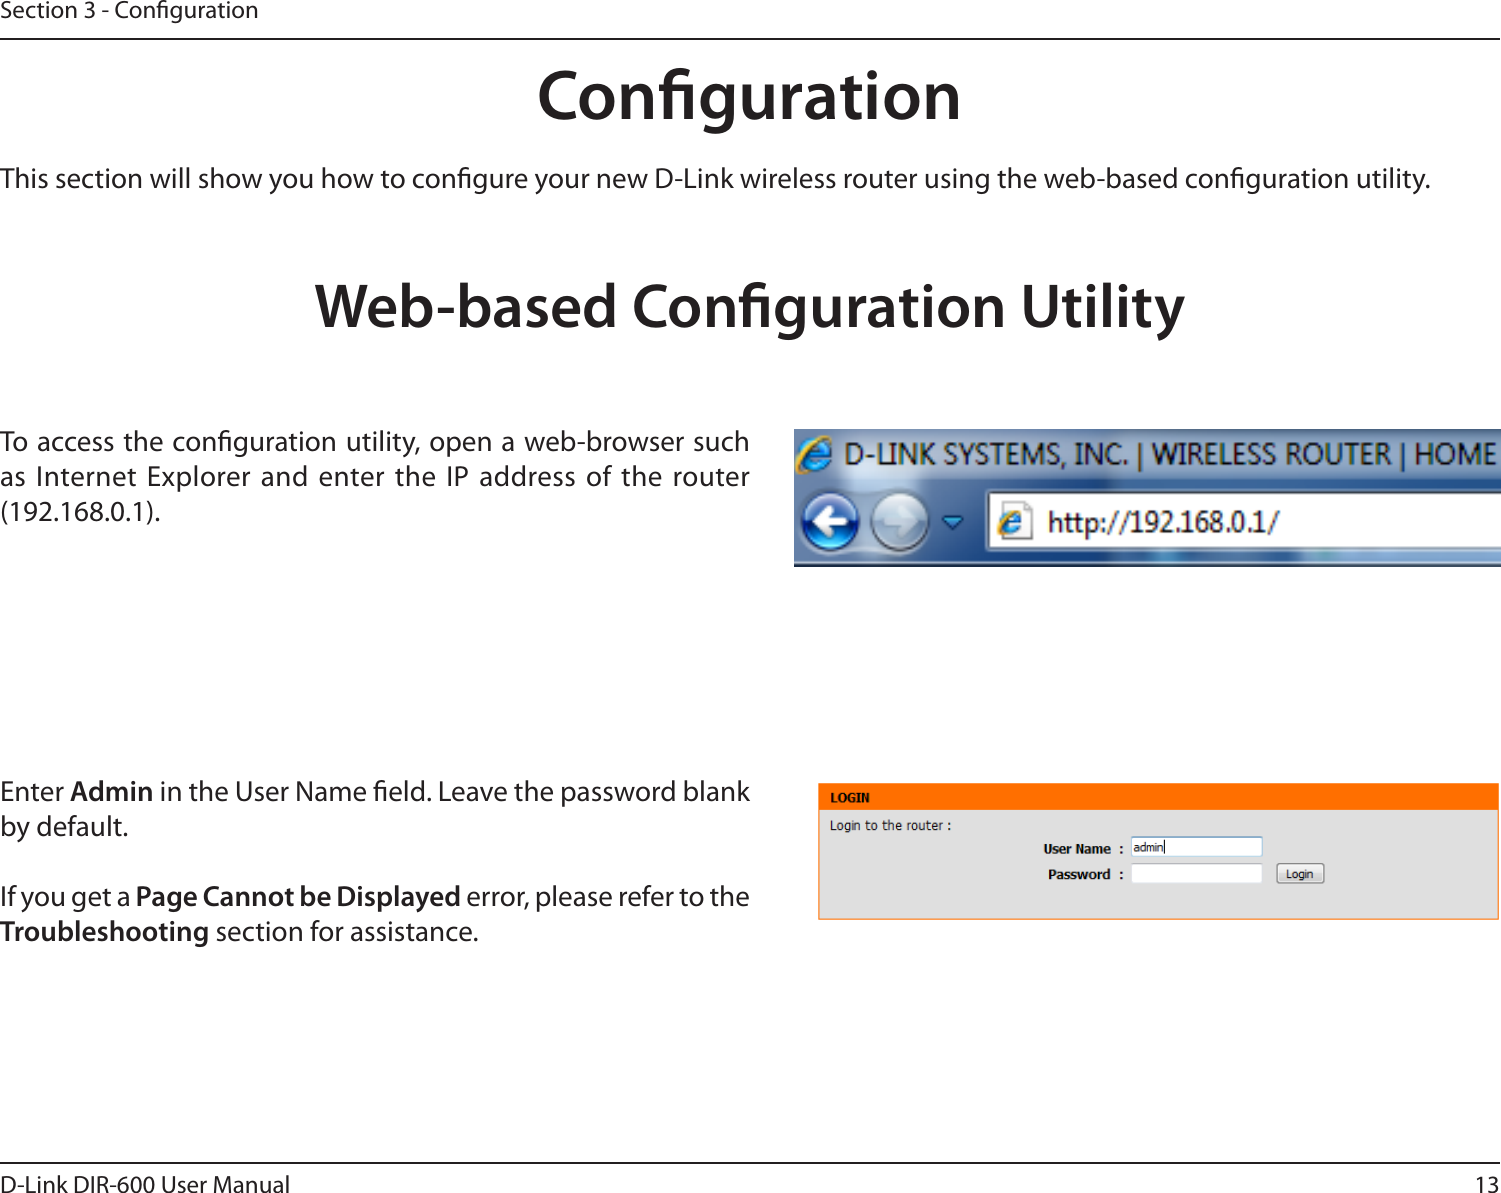 13D-Link DIR-600 User ManualSection 3 - CongurationCongurationThis section will show you how to congure your new D-Link wireless router using the web-based conguration utility.Web-based Conguration UtilityTo access the conguration utility, open a web-browser such as Internet Explorer and  enter the  IP address of the router (192.168.0.1).Enter Admin in the User Name eld. Leave the password blank by default. If you get a Page Cannot be Displayed error, please refer to the Troubleshooting section for assistance.